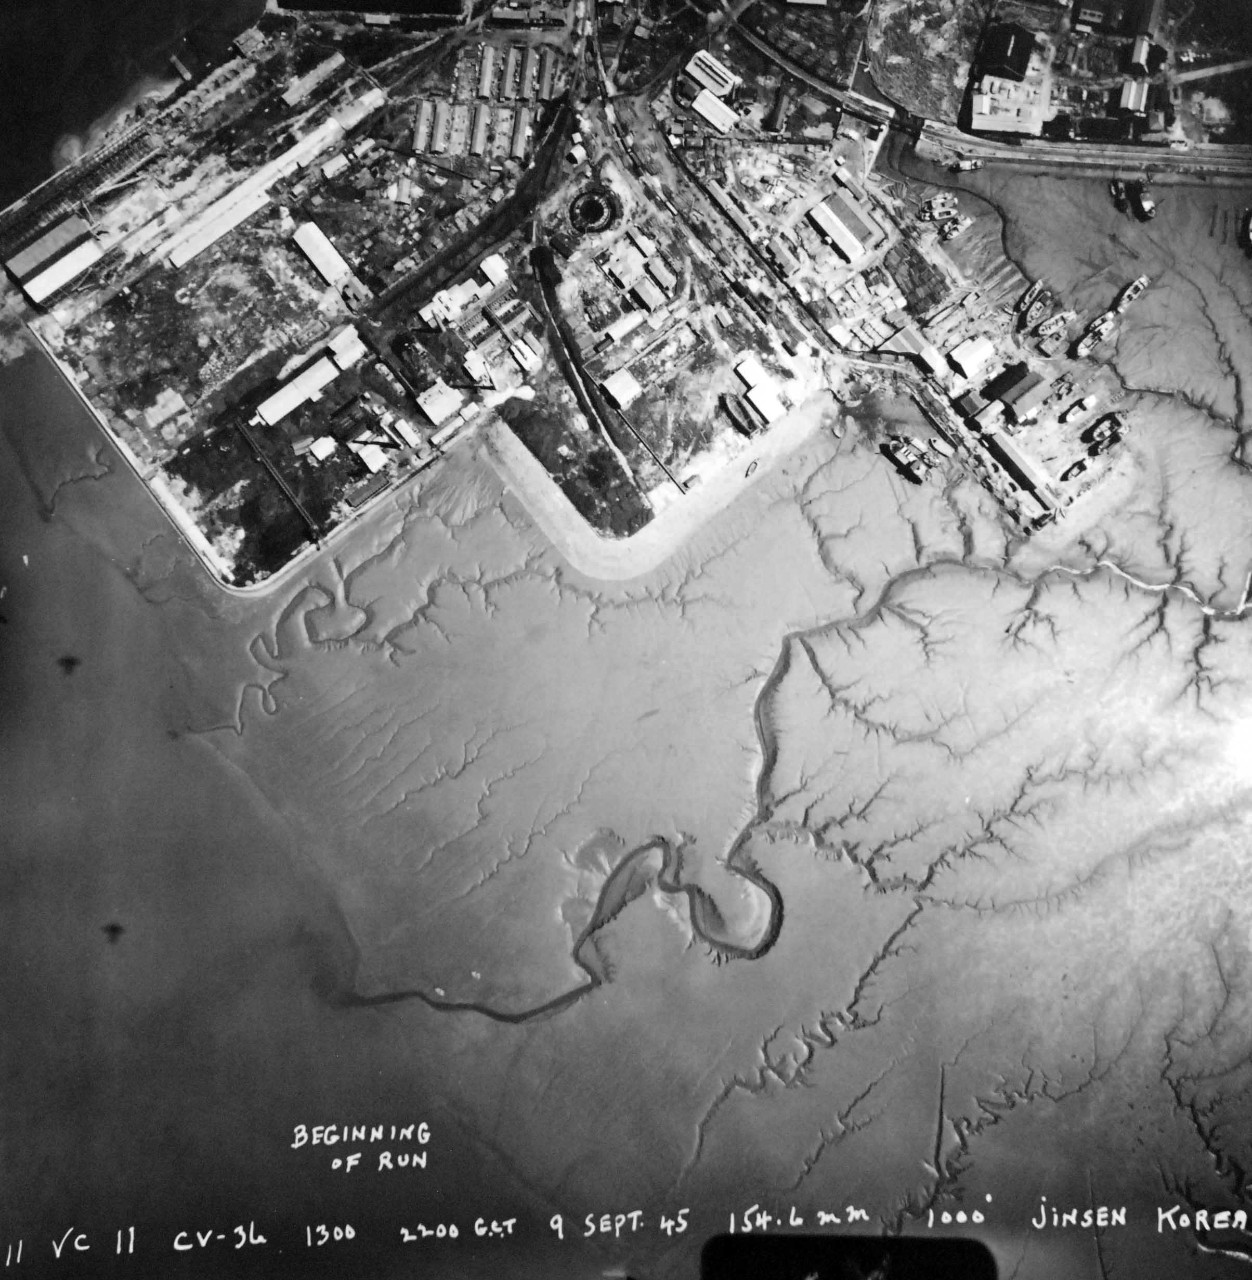 Lot-5767-4:  Aerial photo of Inchon, September 9, 1945. Aerial photographs show Korea during the Japanese Surrender on September 9, 1945.  Shown:  Jinsen (now Inchon).  Note, Allied Fleet off shore.  Photographed by aircraft from USS Antietam (CV-36).   U.S. Army Signal Corps Photograph.   Courtesy of the Library of Congress.  